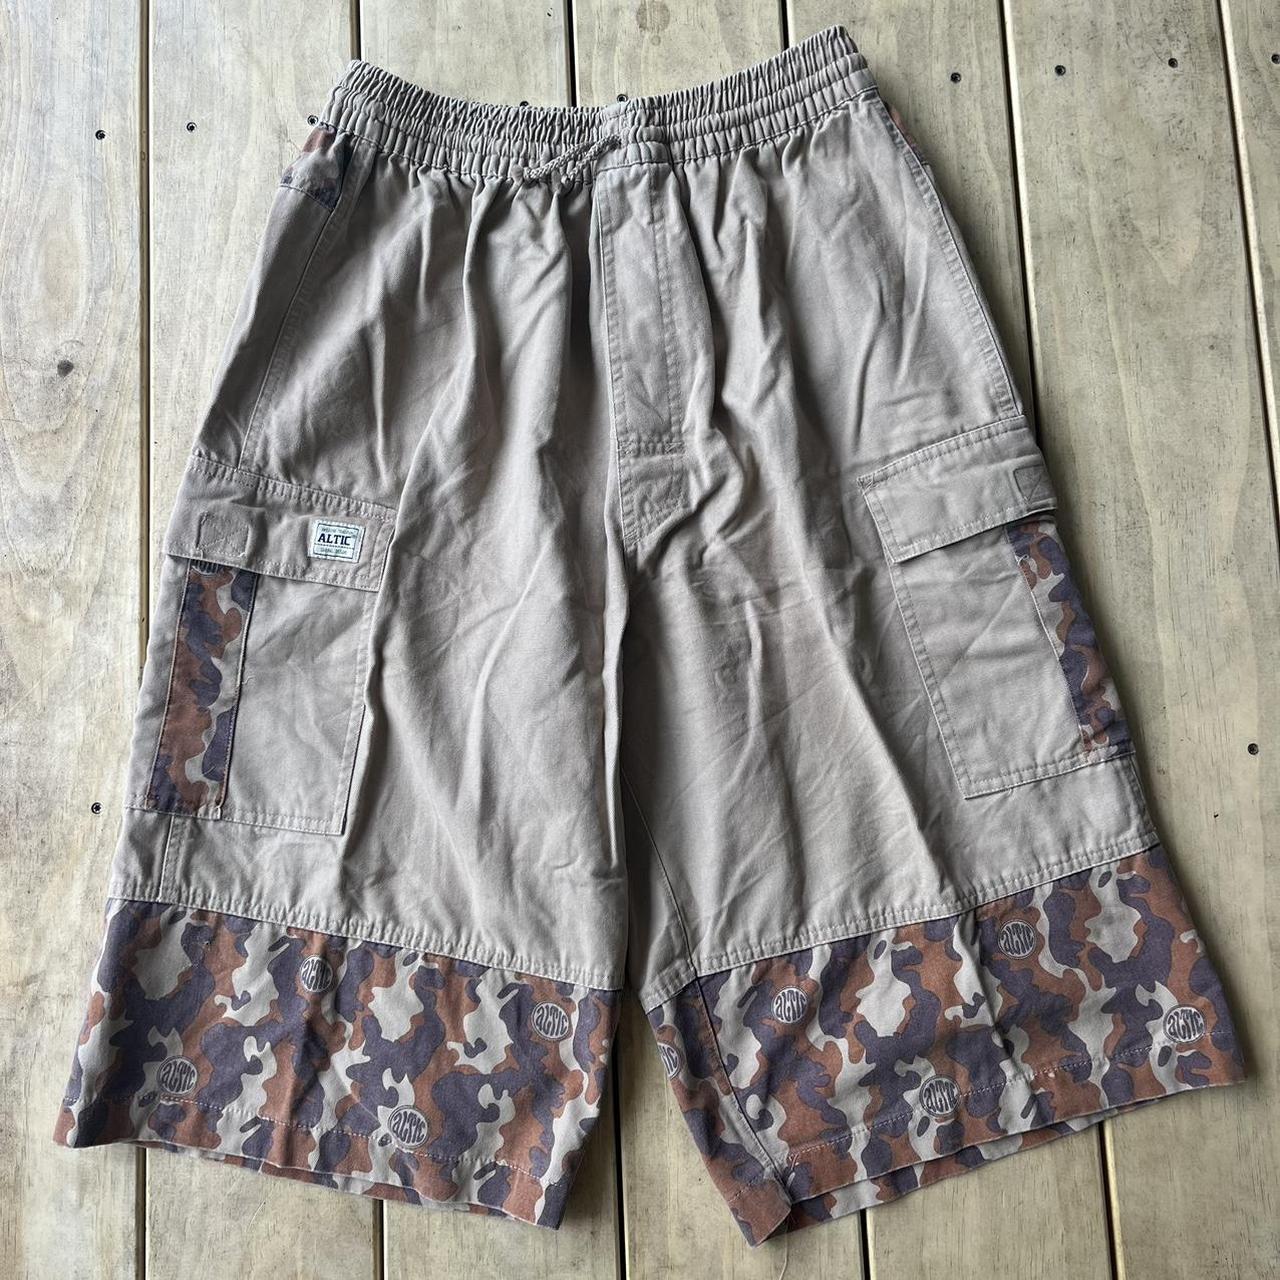 Altic Action Wear 3/4 Cargo Shorts Good quality... - Depop